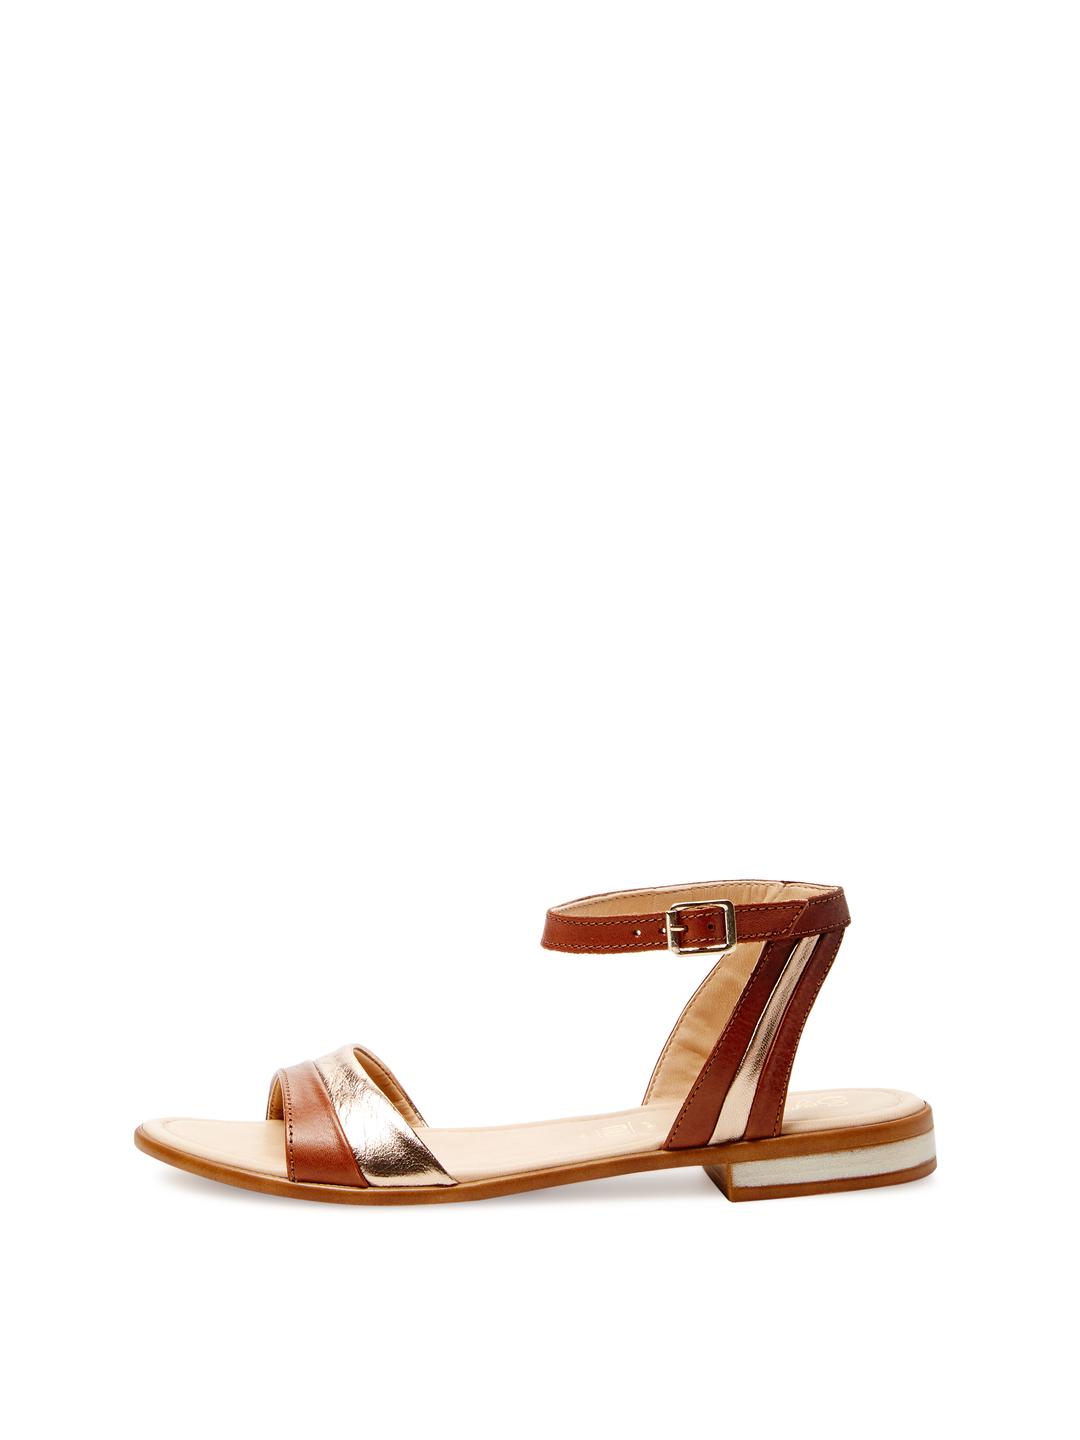 Seychelles Leather Won't Stop Sandal in Brown - Lyst